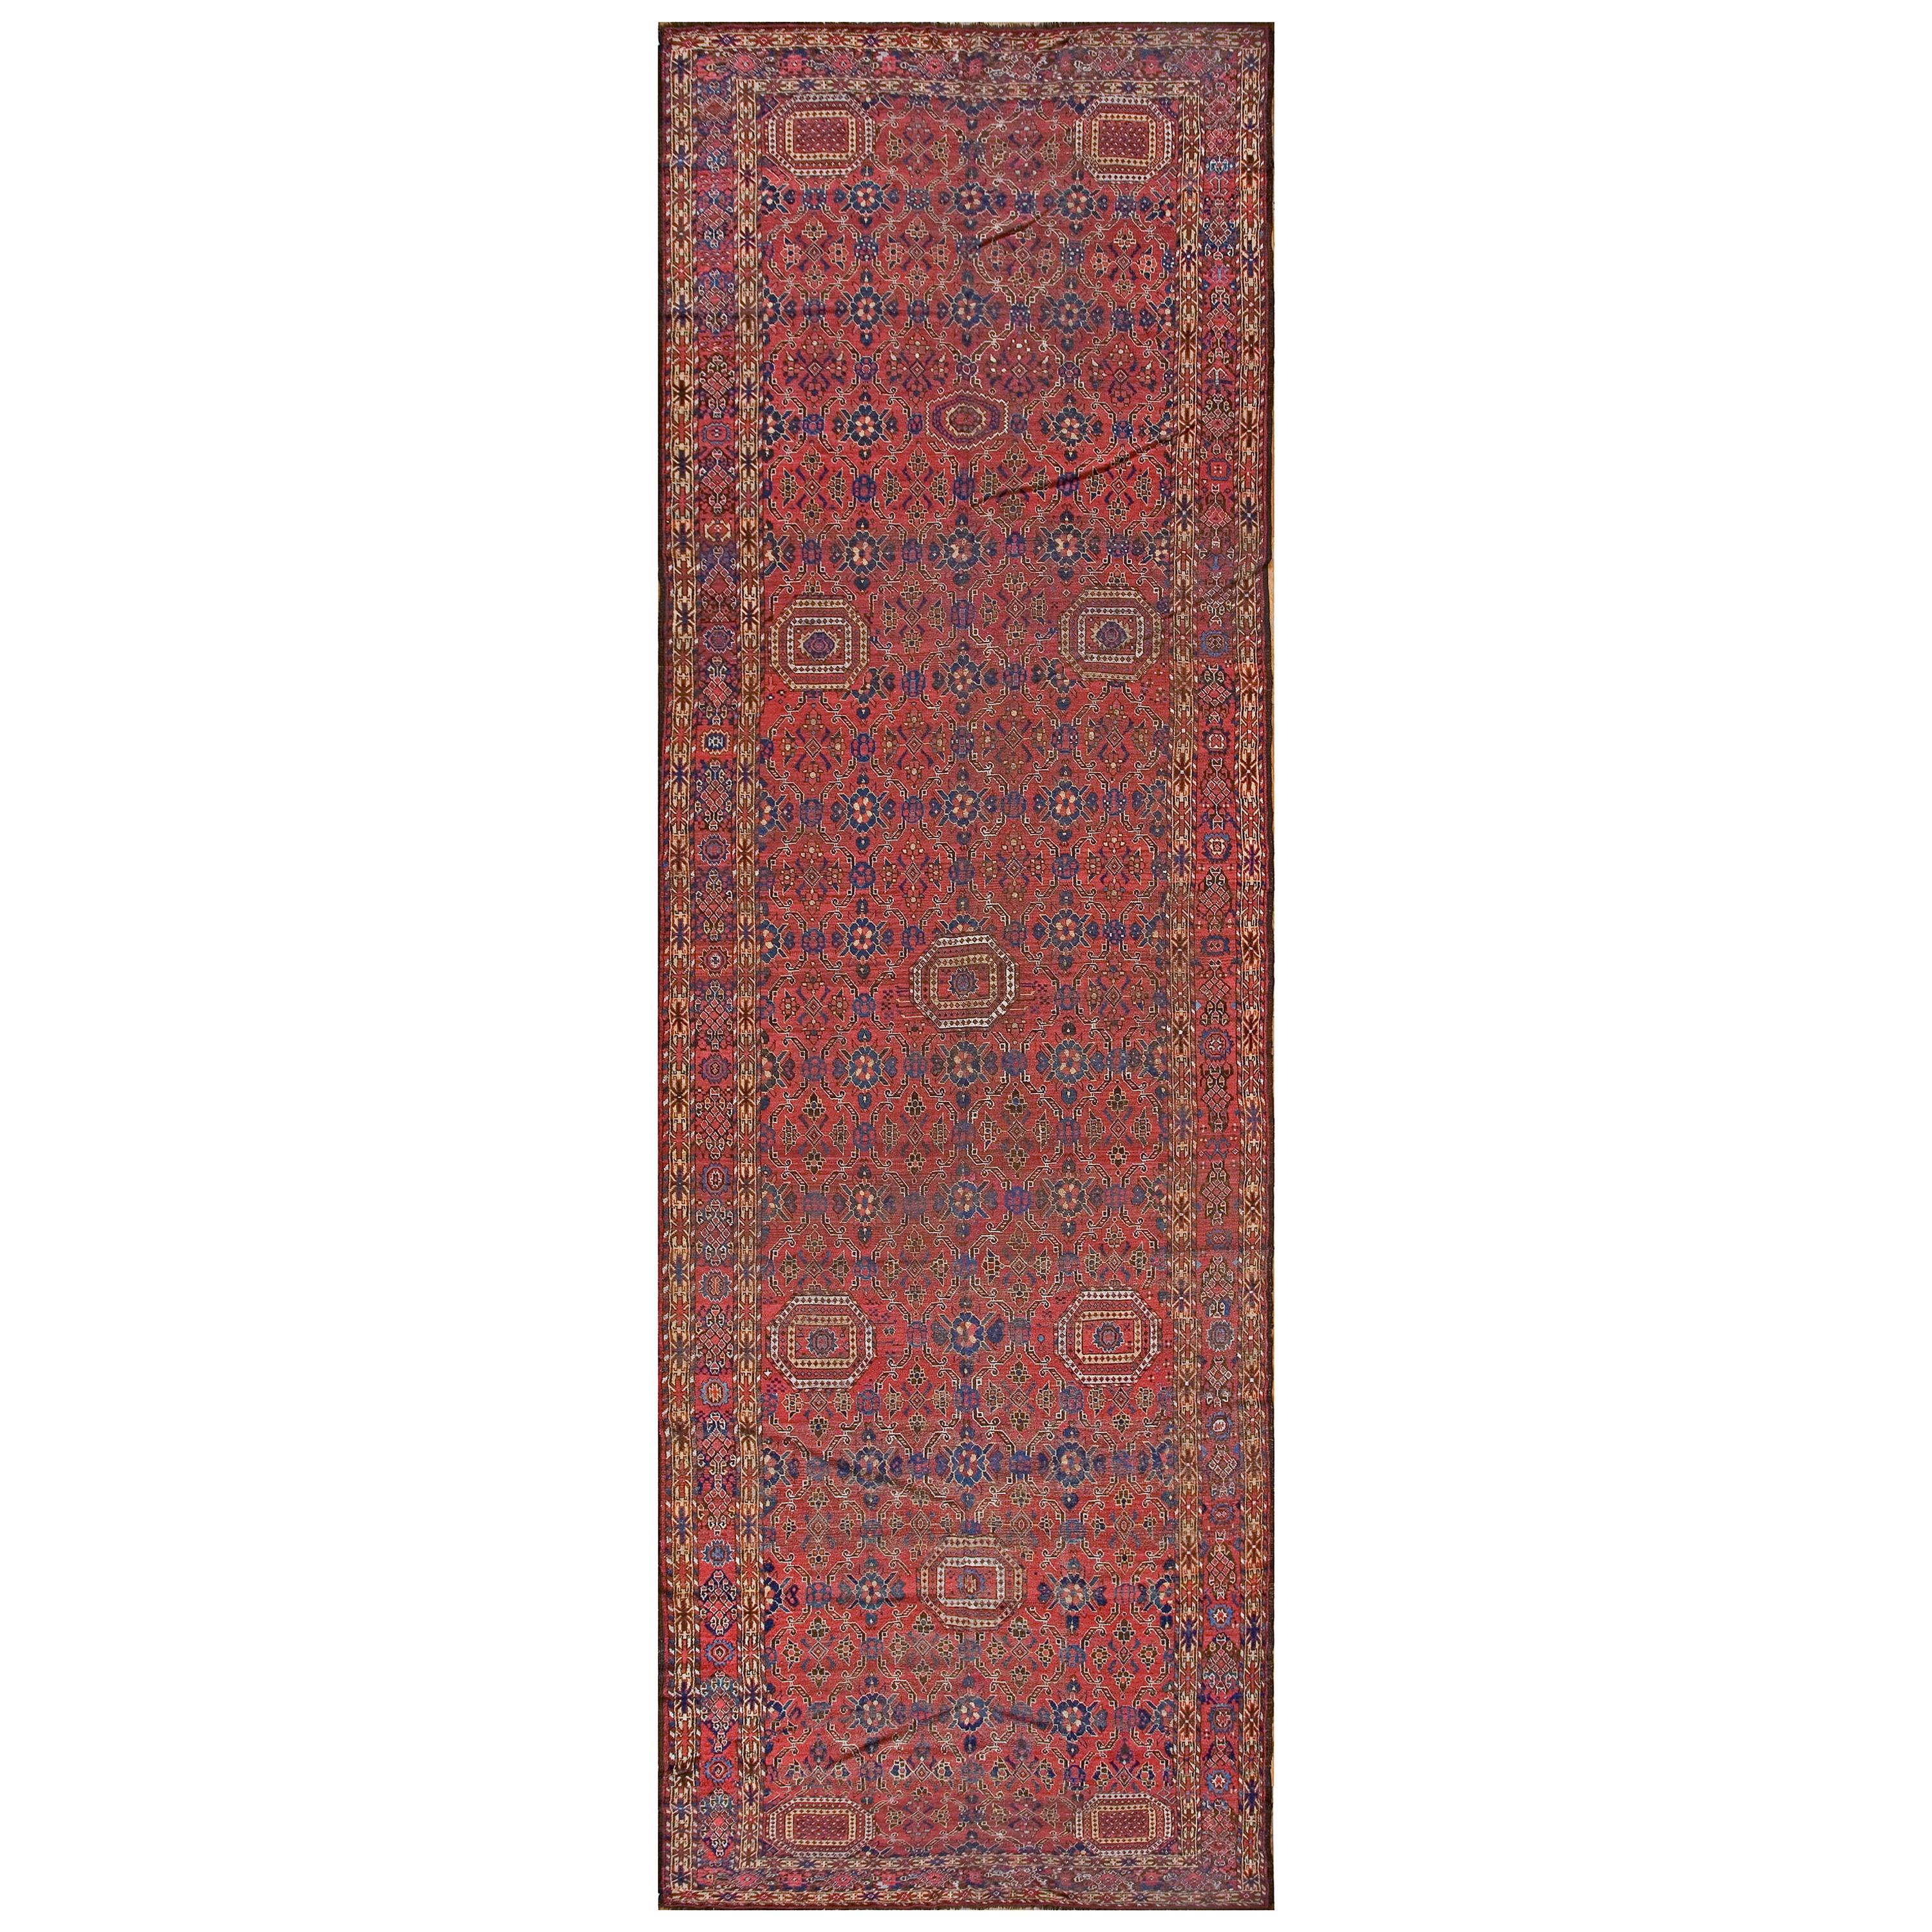 Mid-19th Century Central Asian Beshir Gallery Carpet ( 6'7" x 21'4" -201 x 650 )